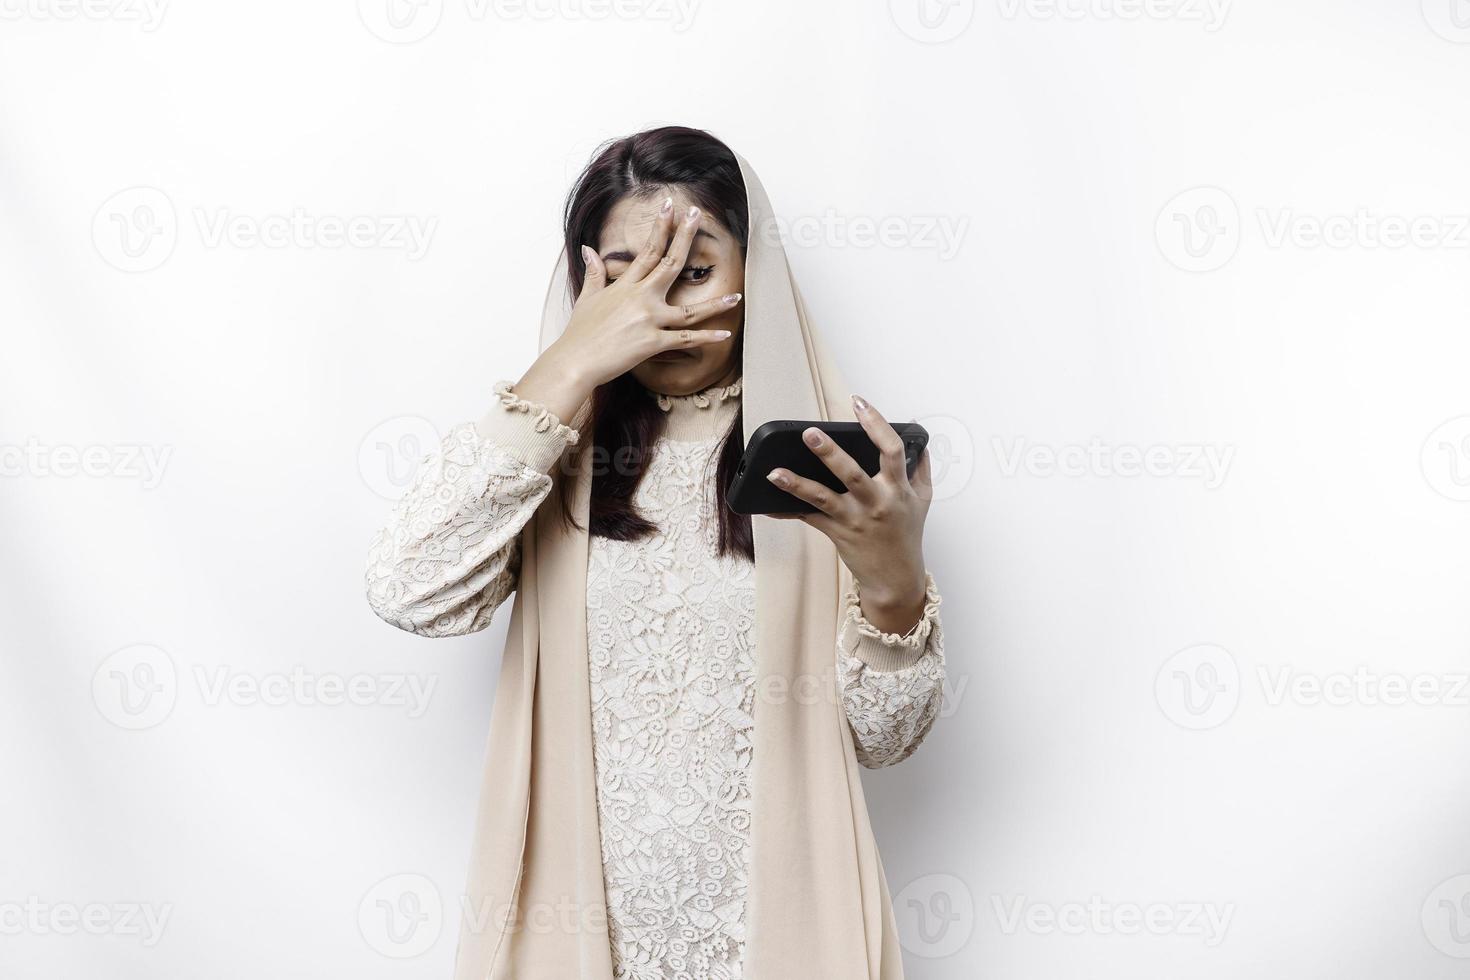 A funny Asian Muslim woman wearing a headscarf is peeking at inappropriate content on her phone isolated on white background. photo